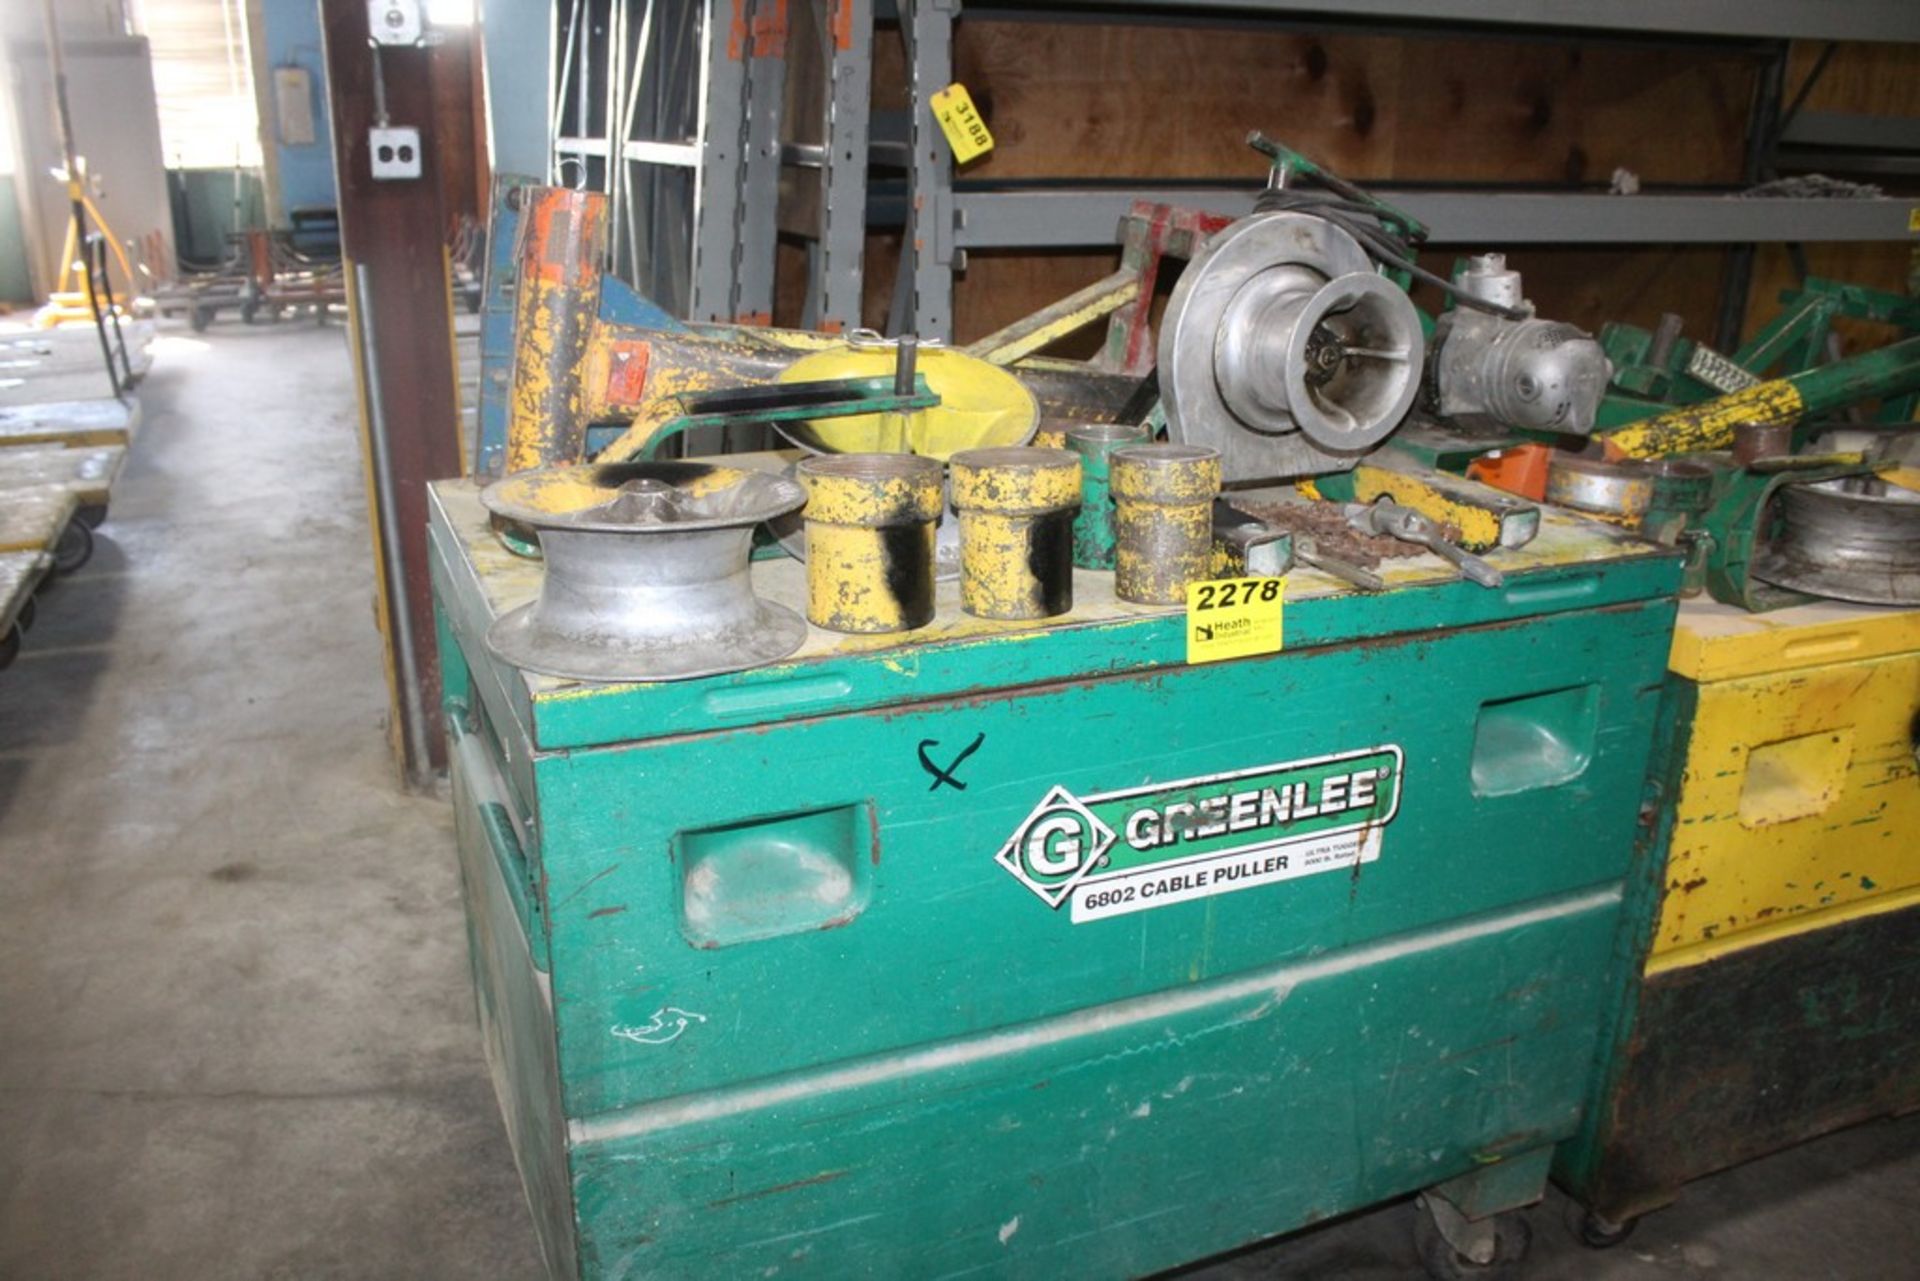 GREENLEE 640 CABLE PULLER WITH ACCESSORIES AND JOB BOX